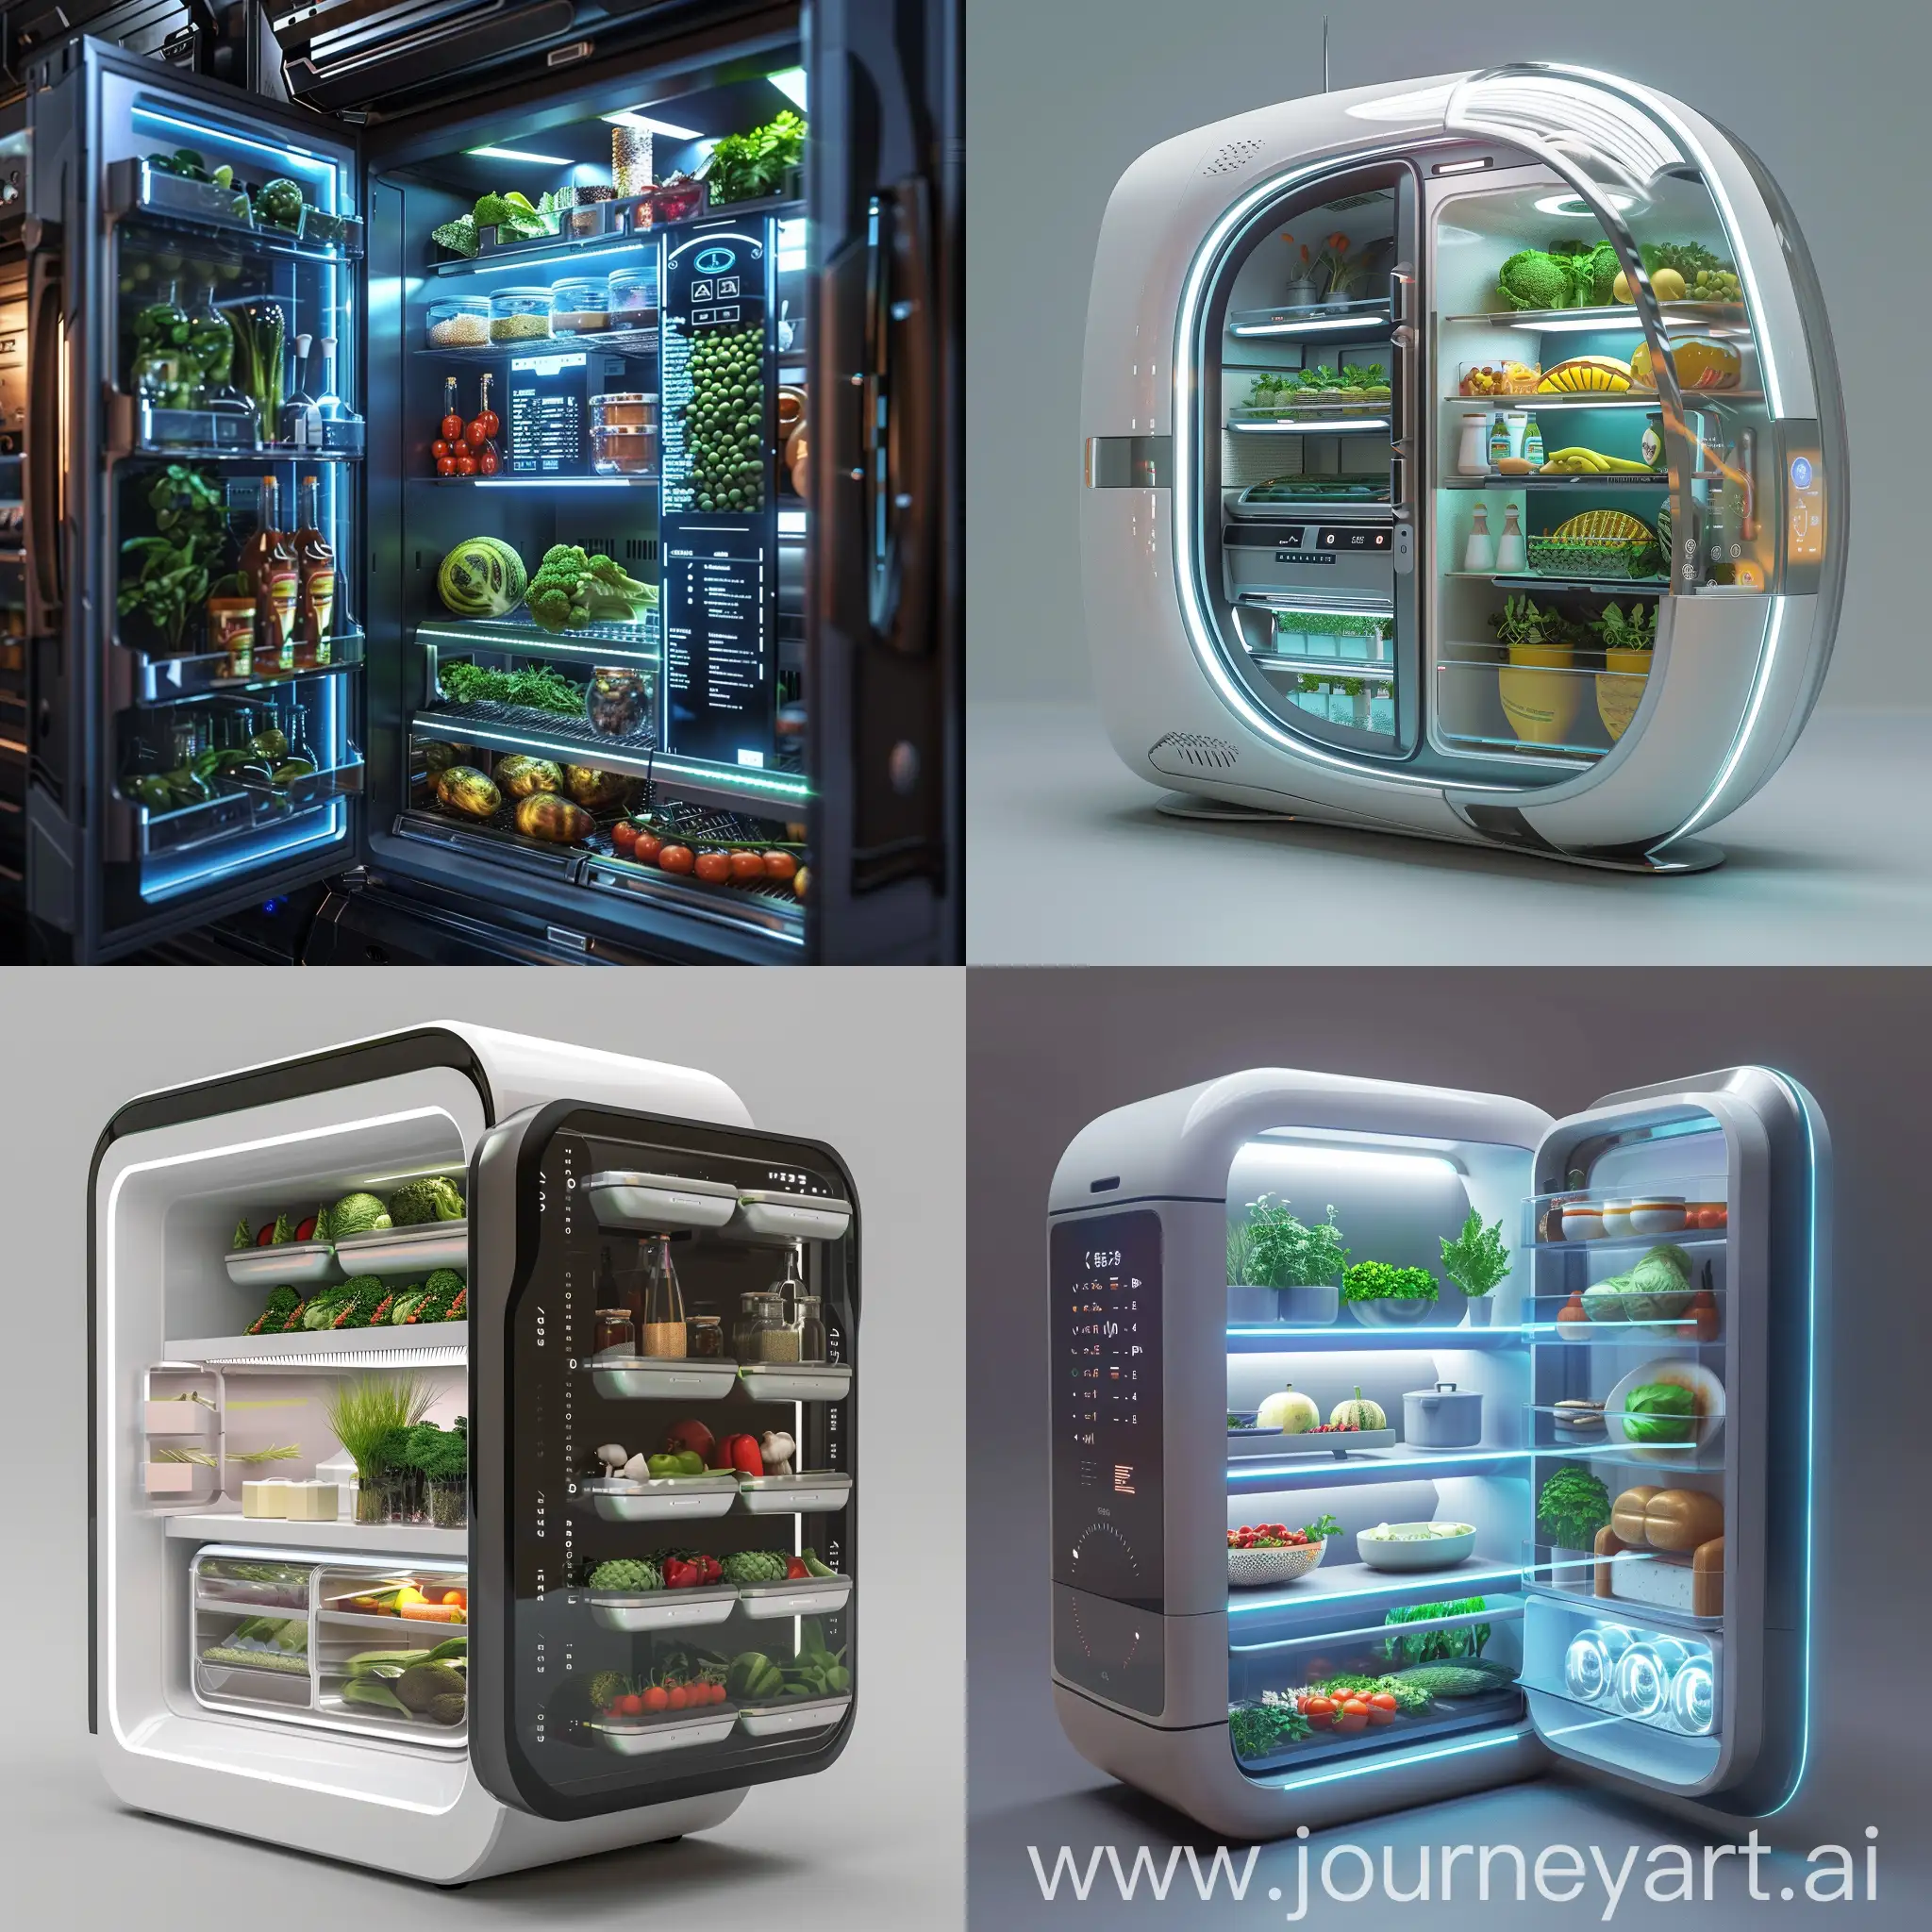 Futuristic fridge, Robotic Chef Assistant (AI & Robotics), Self-Inventory and Replenishment (IoT & Blockchain), Personalized Nutrition (Biotechnology & Gene Editing), Virtual Reality Meal Planning (VR), Augmented Reality Food Labeling (AR), Nano-Preservation (Advanced Materials Science), Vertical Farming Integration (Biotechnology & IoT), Waste Composting Unit (Biotechnology), Energy Efficient Design (Advanced Materials Science), Self-Cleaning Surfaces (Advanced Materials Science), Kinetic Display (AI & Advanced Materials Science), Voice Control Interface (AI), Modular Design (Advanced Materials Science), Transparent or Tinted Glass Doors (Advanced Materials Science), Organic LED Lighting (Advanced Materials Science), Recycled or Biodegradable Materials (Sustainability & Advanced Materials Science), 3D Printed Accents (3D Printing), Interactive Recipe Projection (VR & AR), Social Media Integration (IoT), "Living" Fridge Exterior (Biotechnology & Advanced Materials Science), in futuristic style --stylize 1000